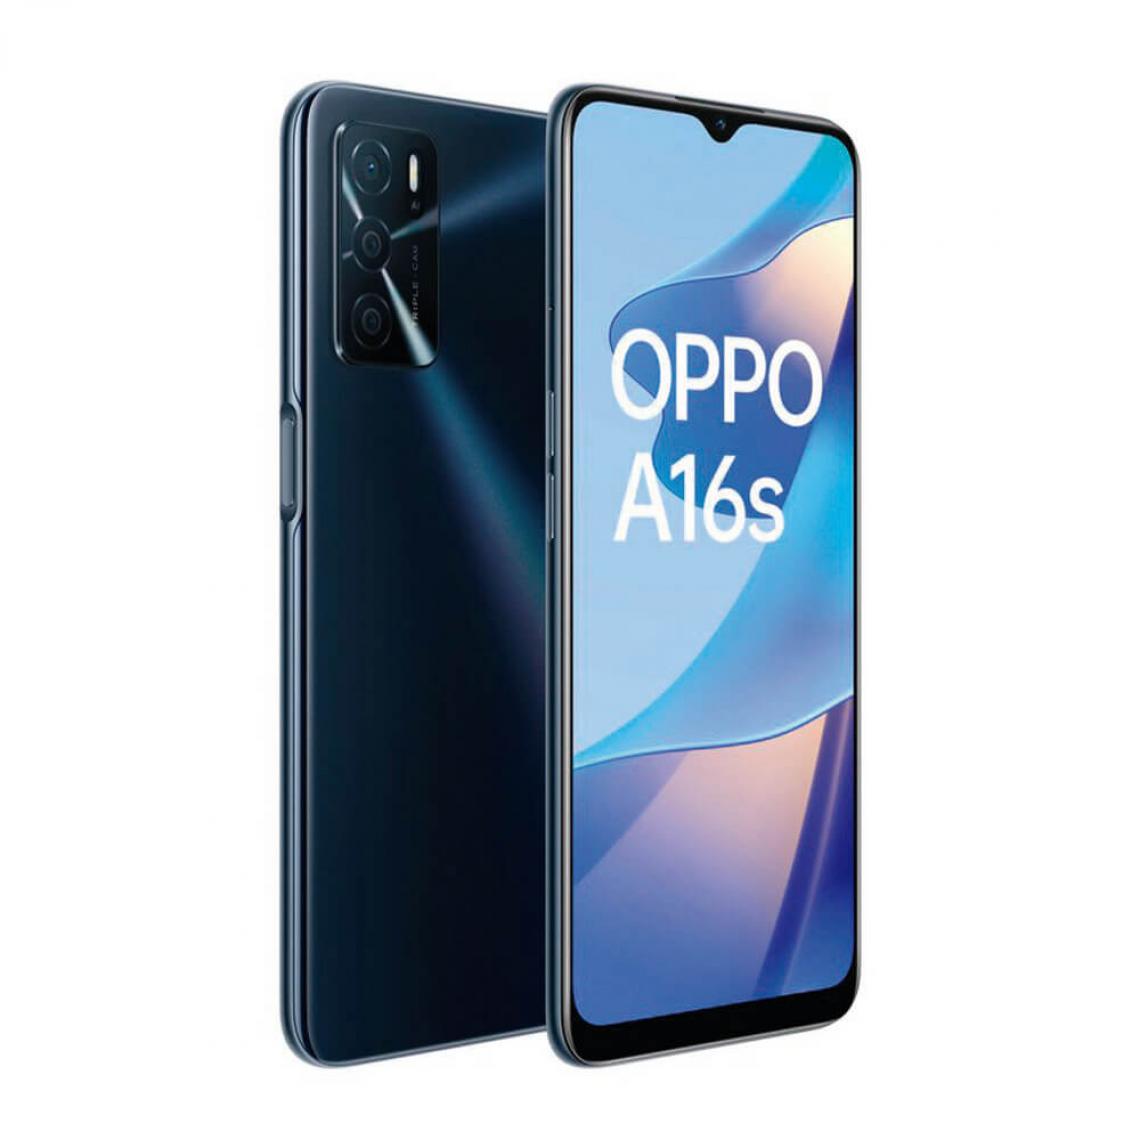 Oppo - Oppo A16s 4GB/64GB Noir (Crystal Black) Dual SIM CPH2271 - Smartphone Android